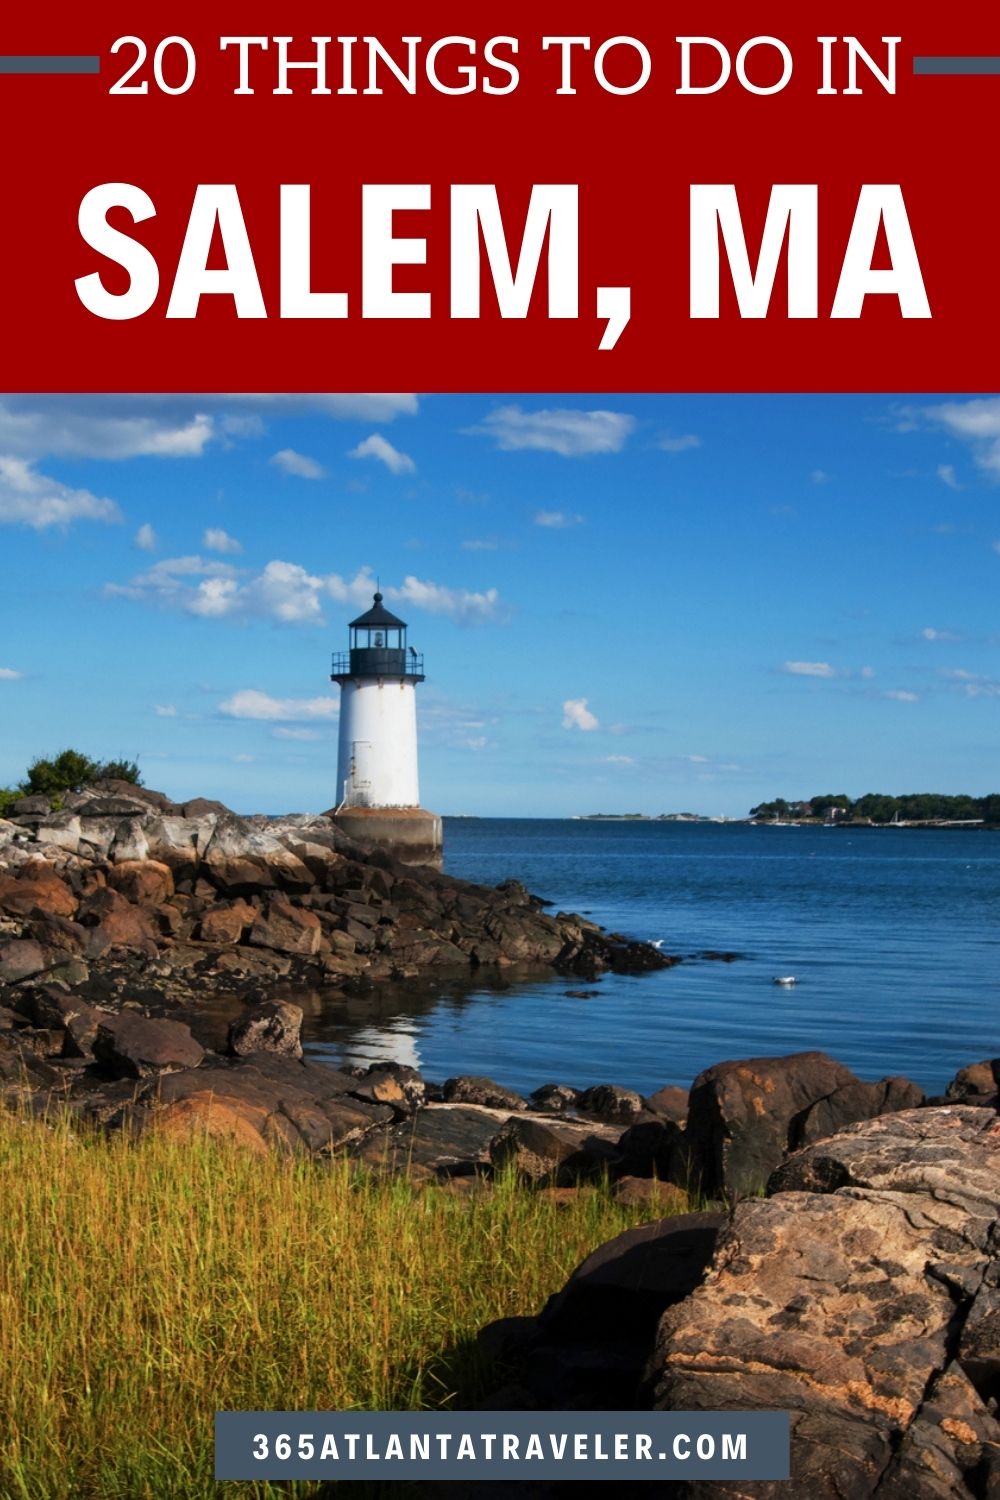 20 WITCHY THINGS TO DO IN SALEM MA YOU'LL LOVE